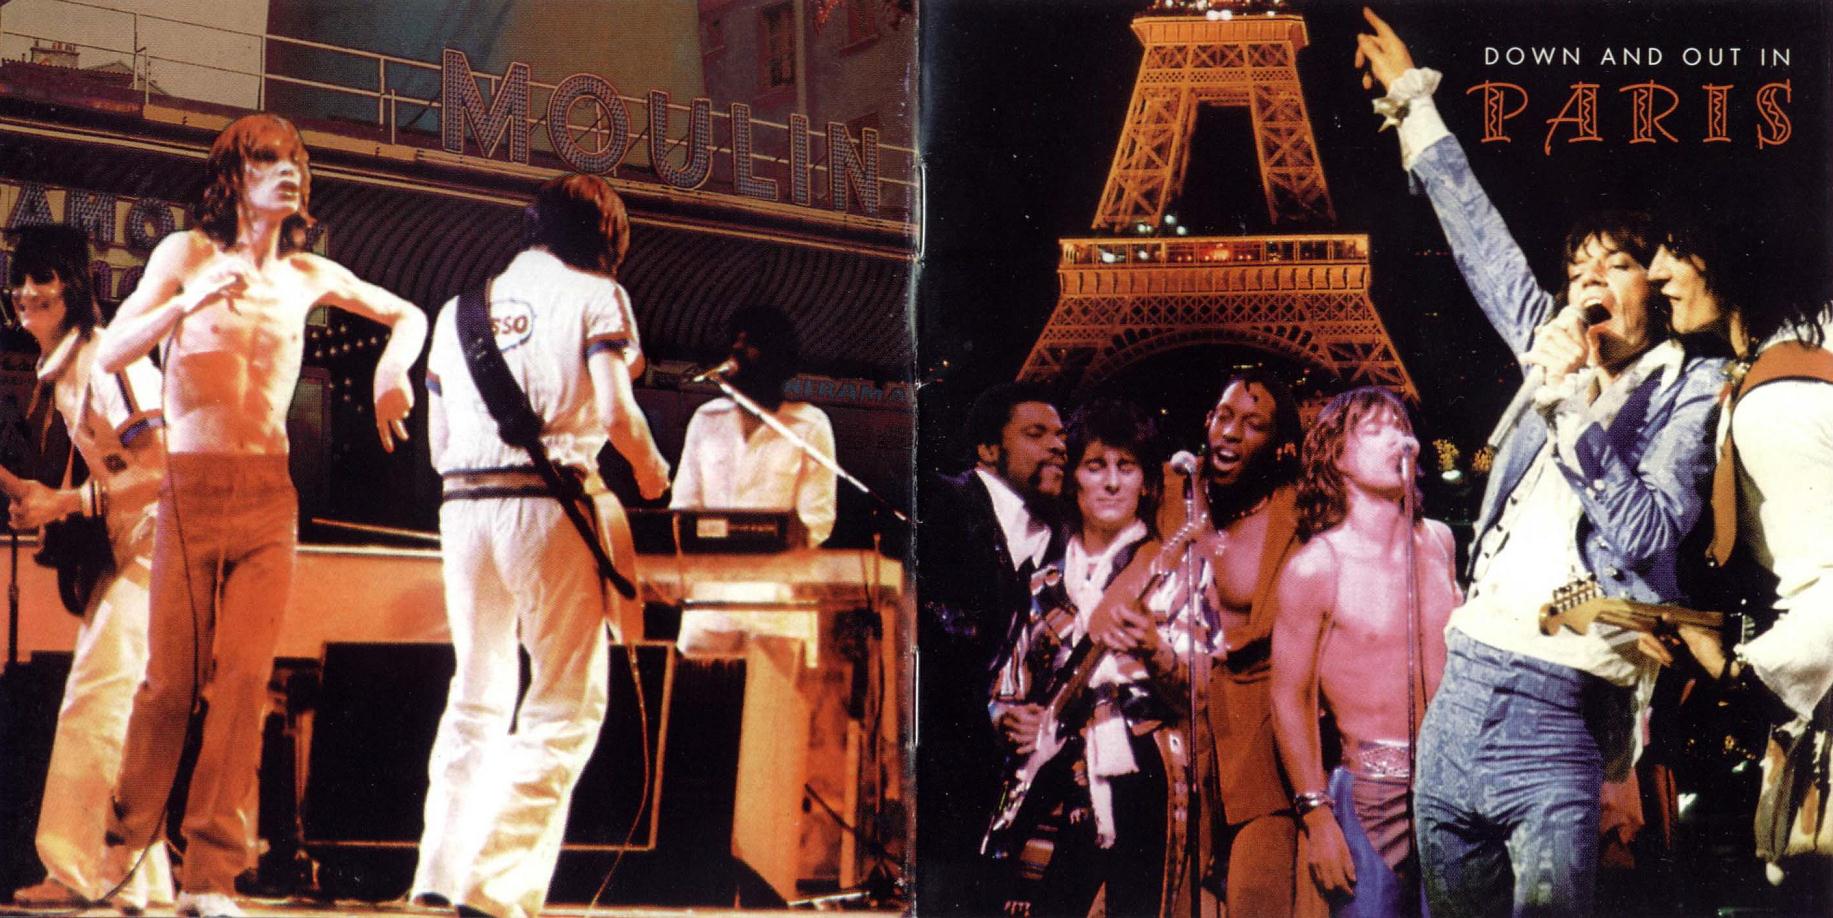 1976-07-06-down_and_out_in_paris-front